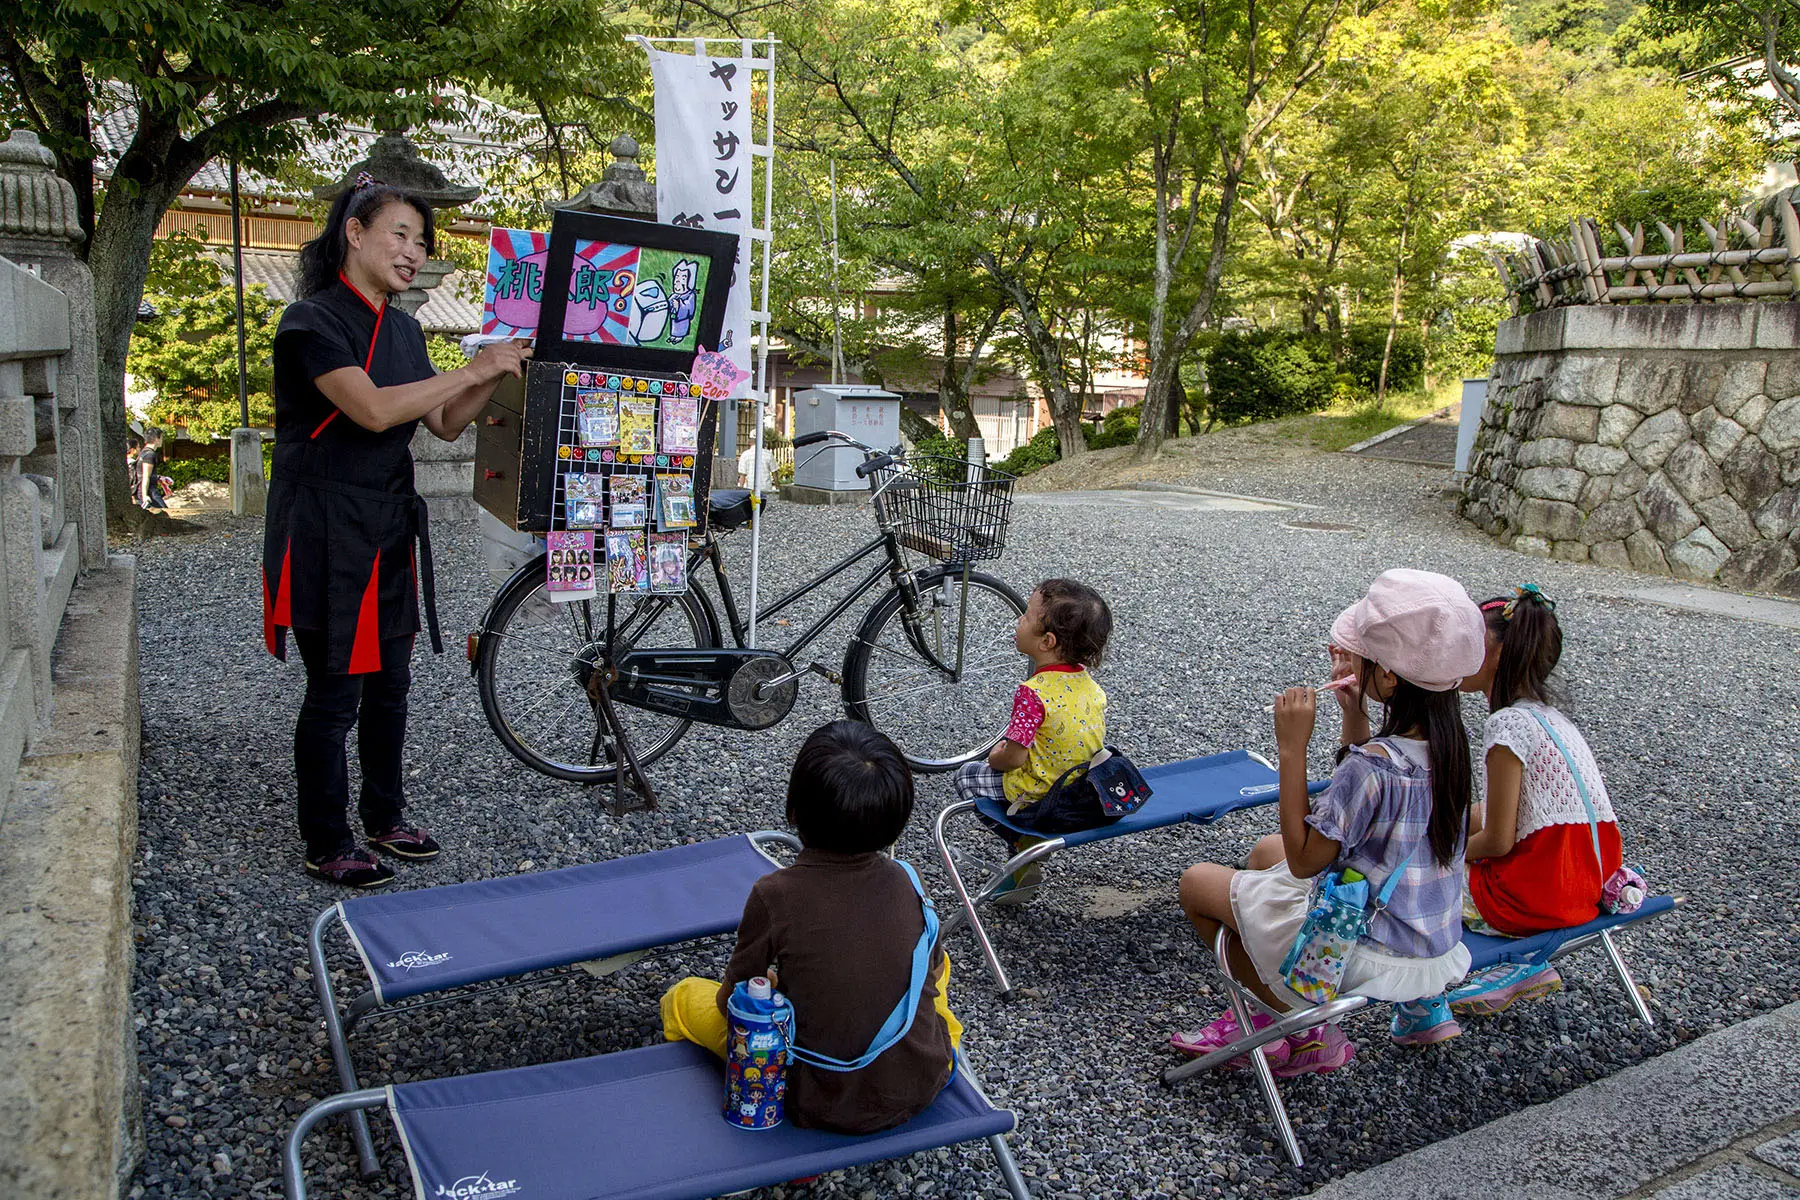 A teacher telling a famous Japanese story Momotaro by playing traditional Kami-shibai for kids in a park in Kyoto